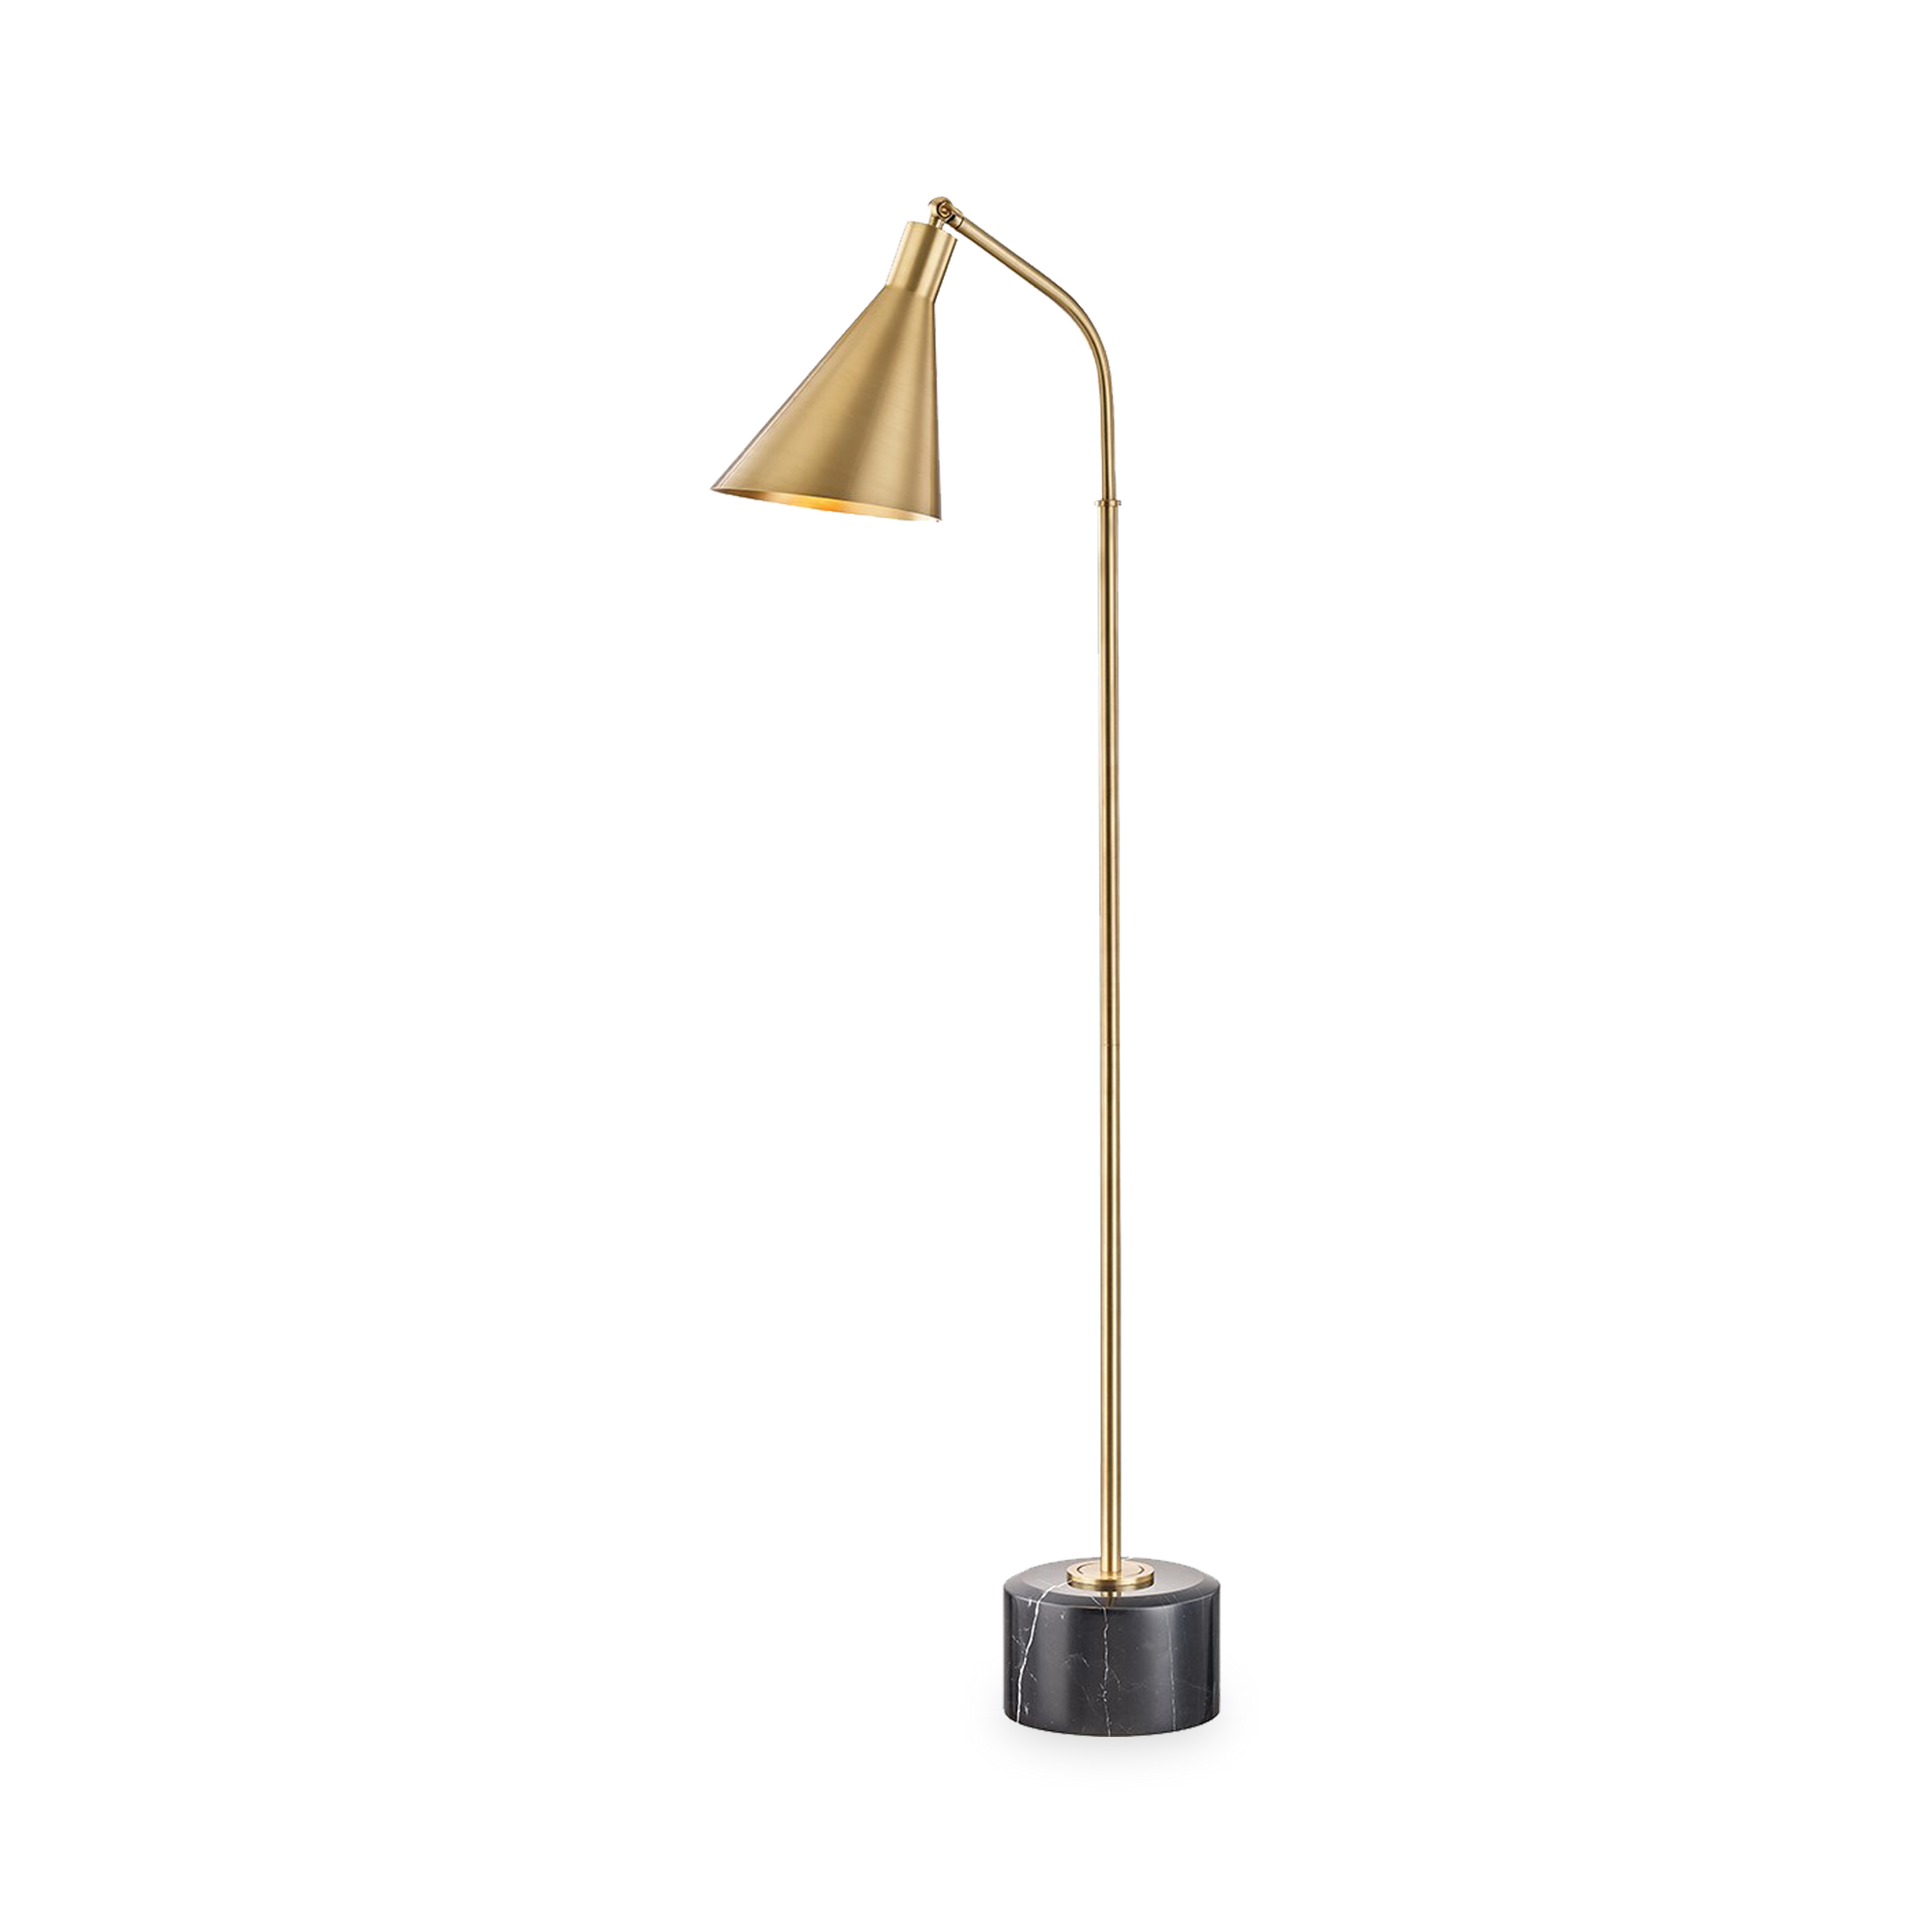 Form follows function in our mid-century inspired Stanton Floor lamp.